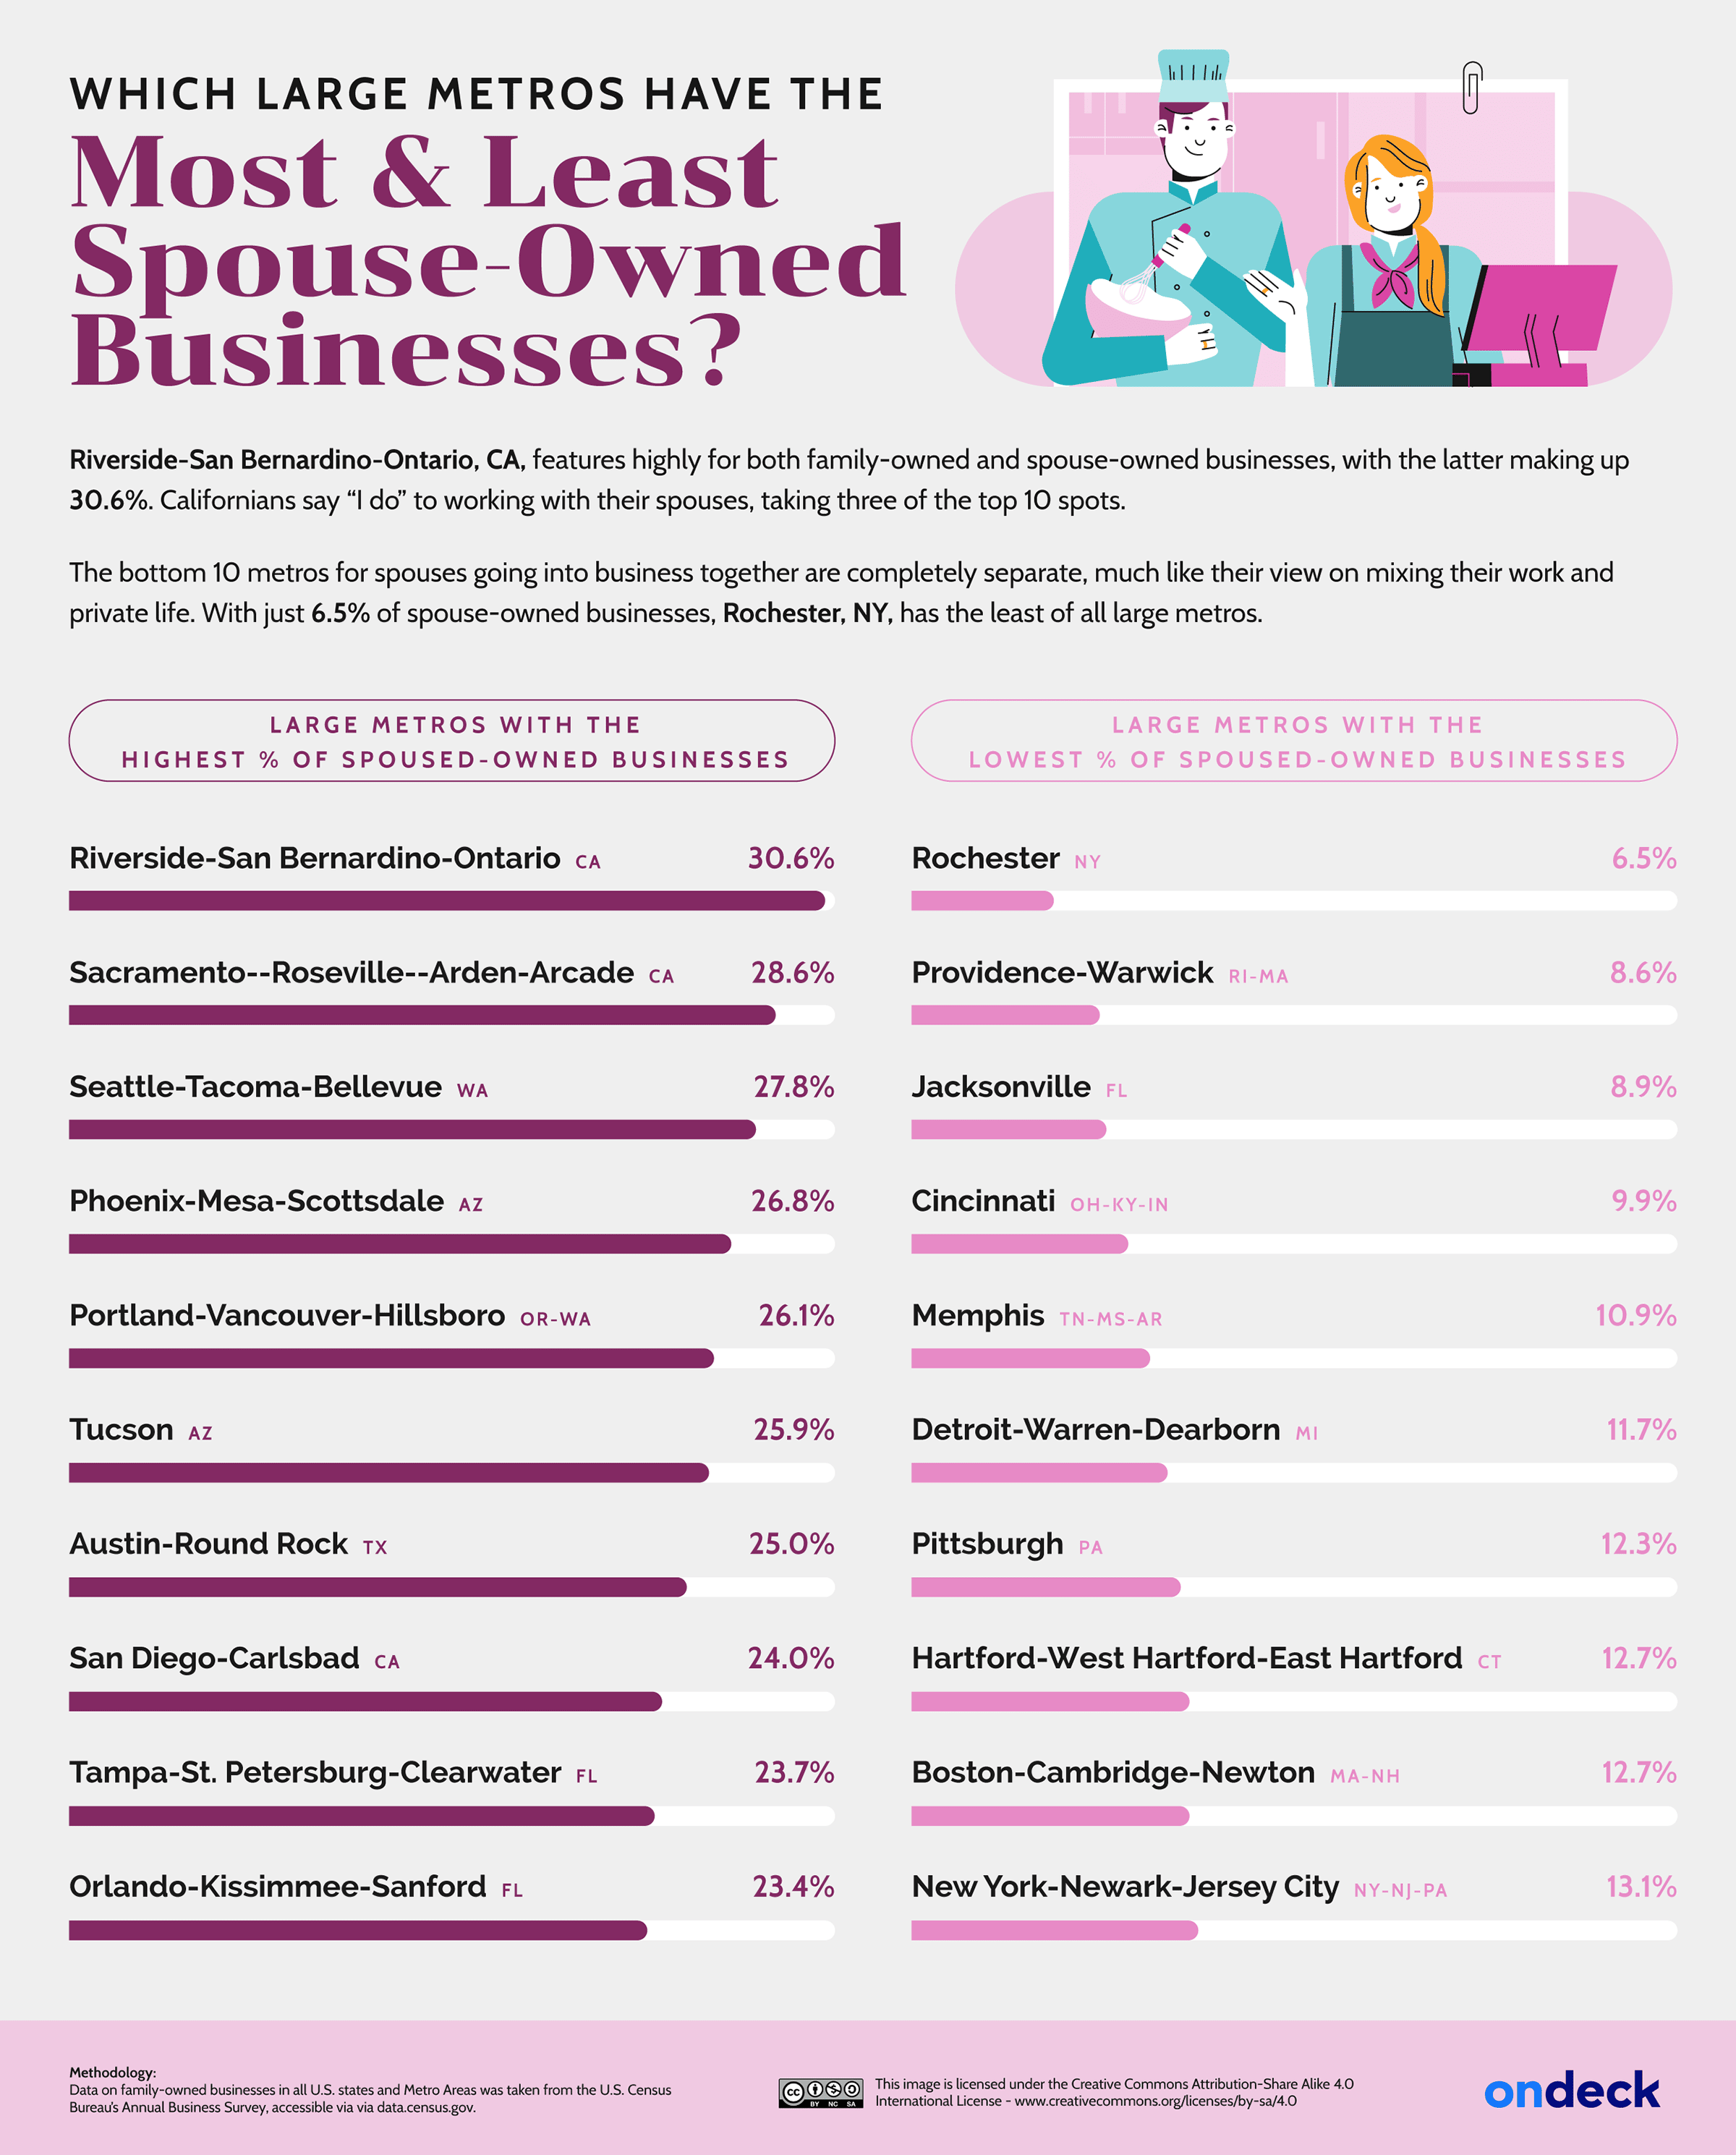 Most & Least Spouse-Owned Businesses